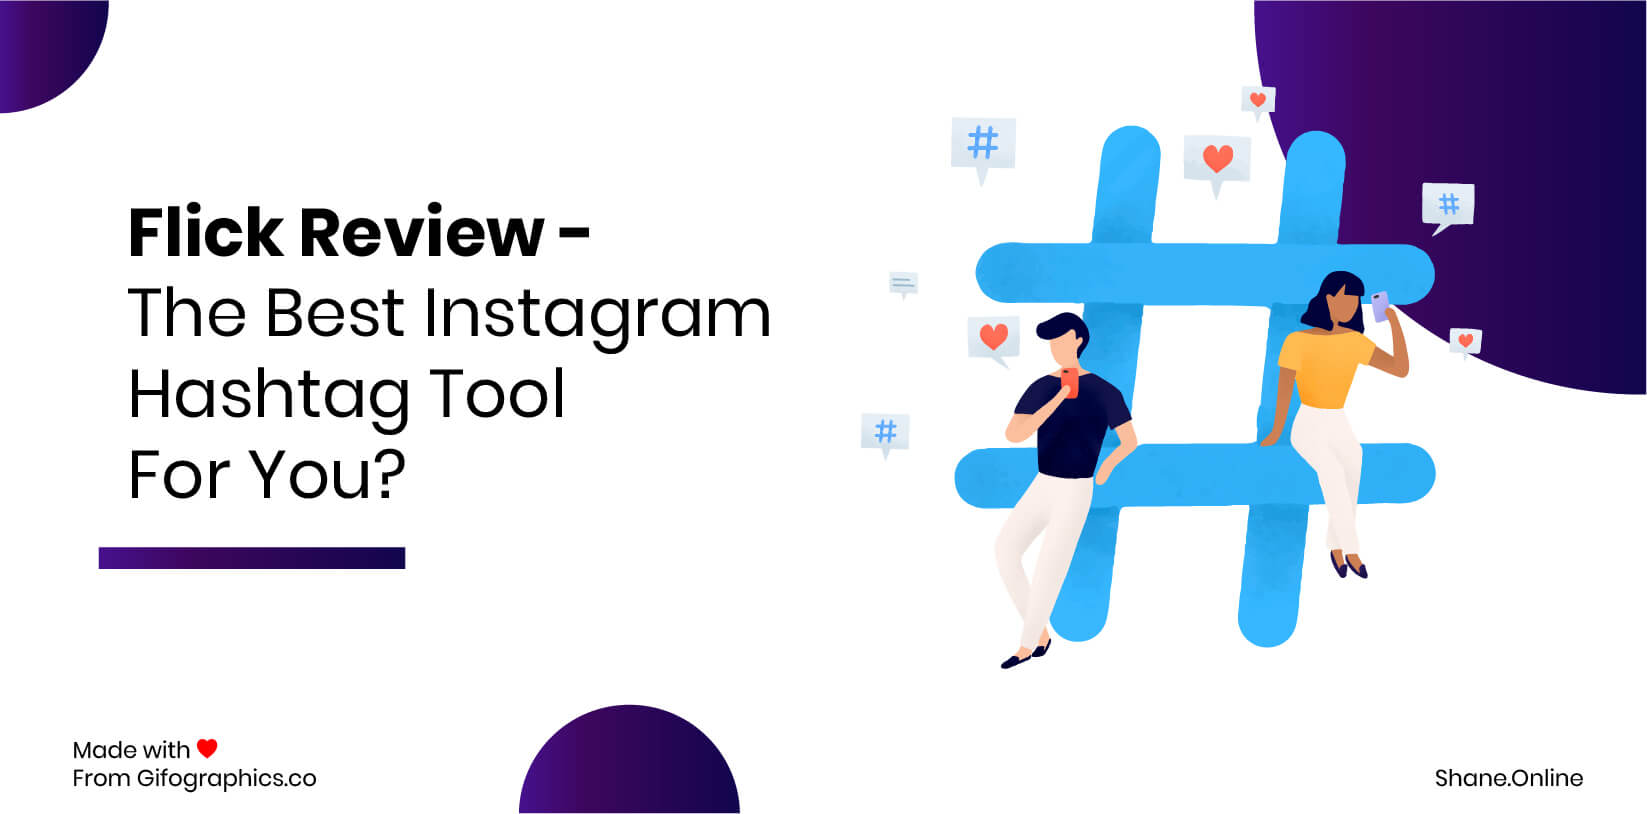 Flick Review - The Best Instagram Hashtag Tool For You